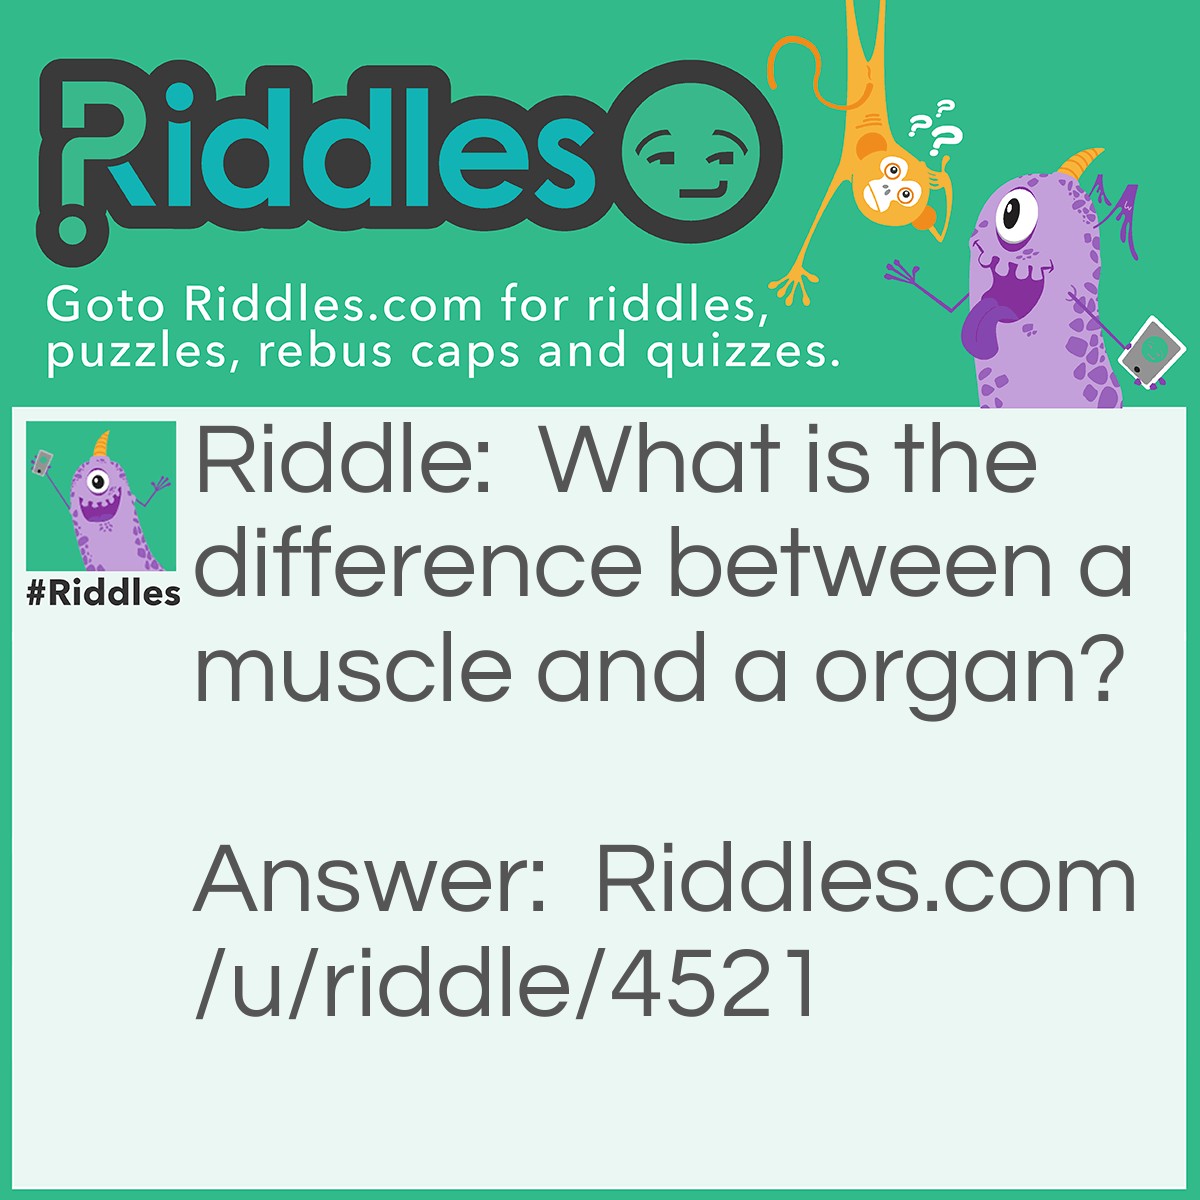 Riddle: What is the difference between a muscle and a organ? Answer: One plays music. CREDIT To: Annalise French